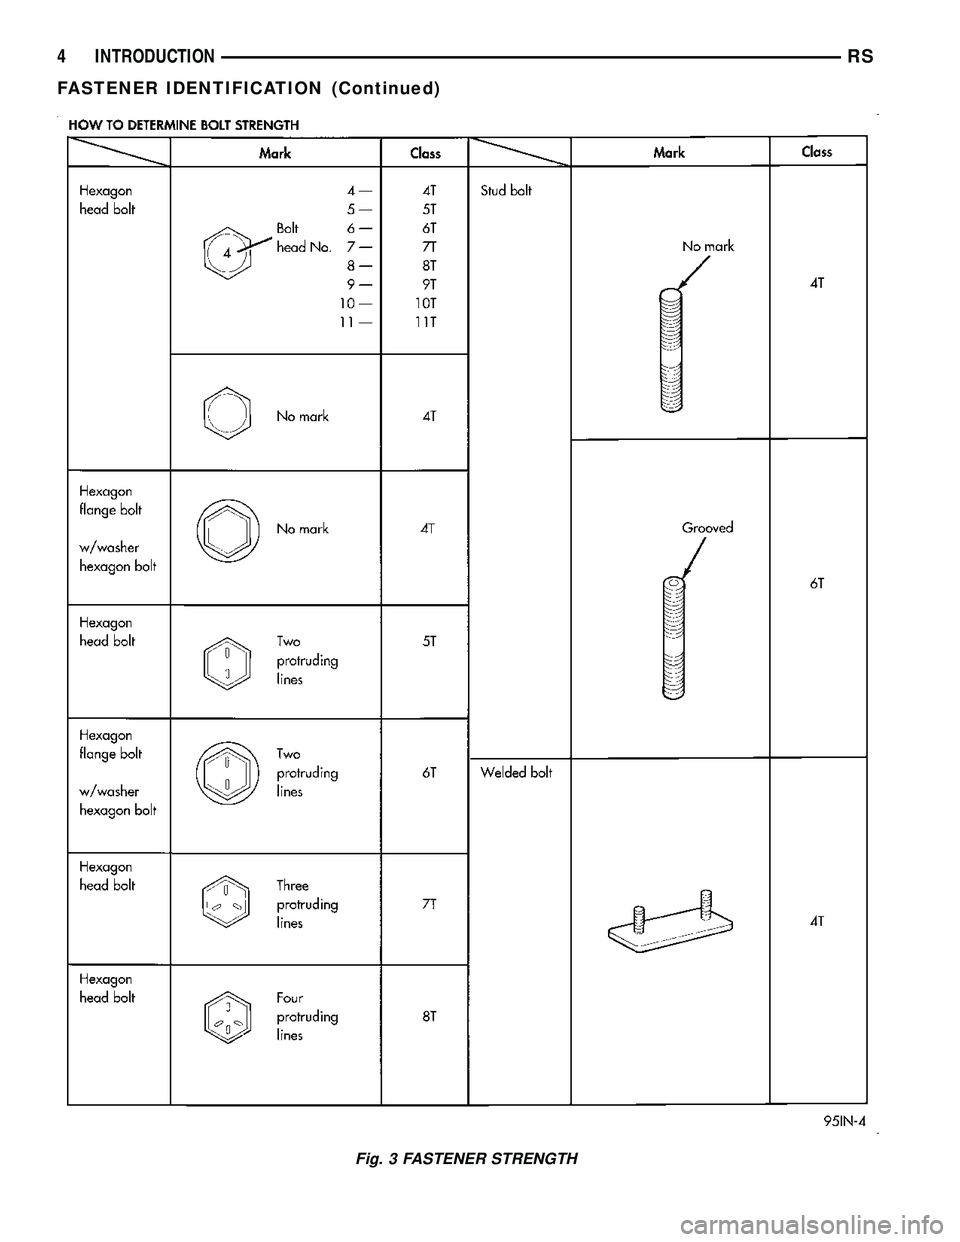 DODGE TOWN AND COUNTRY 2004  Service Manual Fig. 3 FASTENER STRENGTH
4 INTRODUCTIONRS
FASTENER IDENTIFICATION (Continued) 